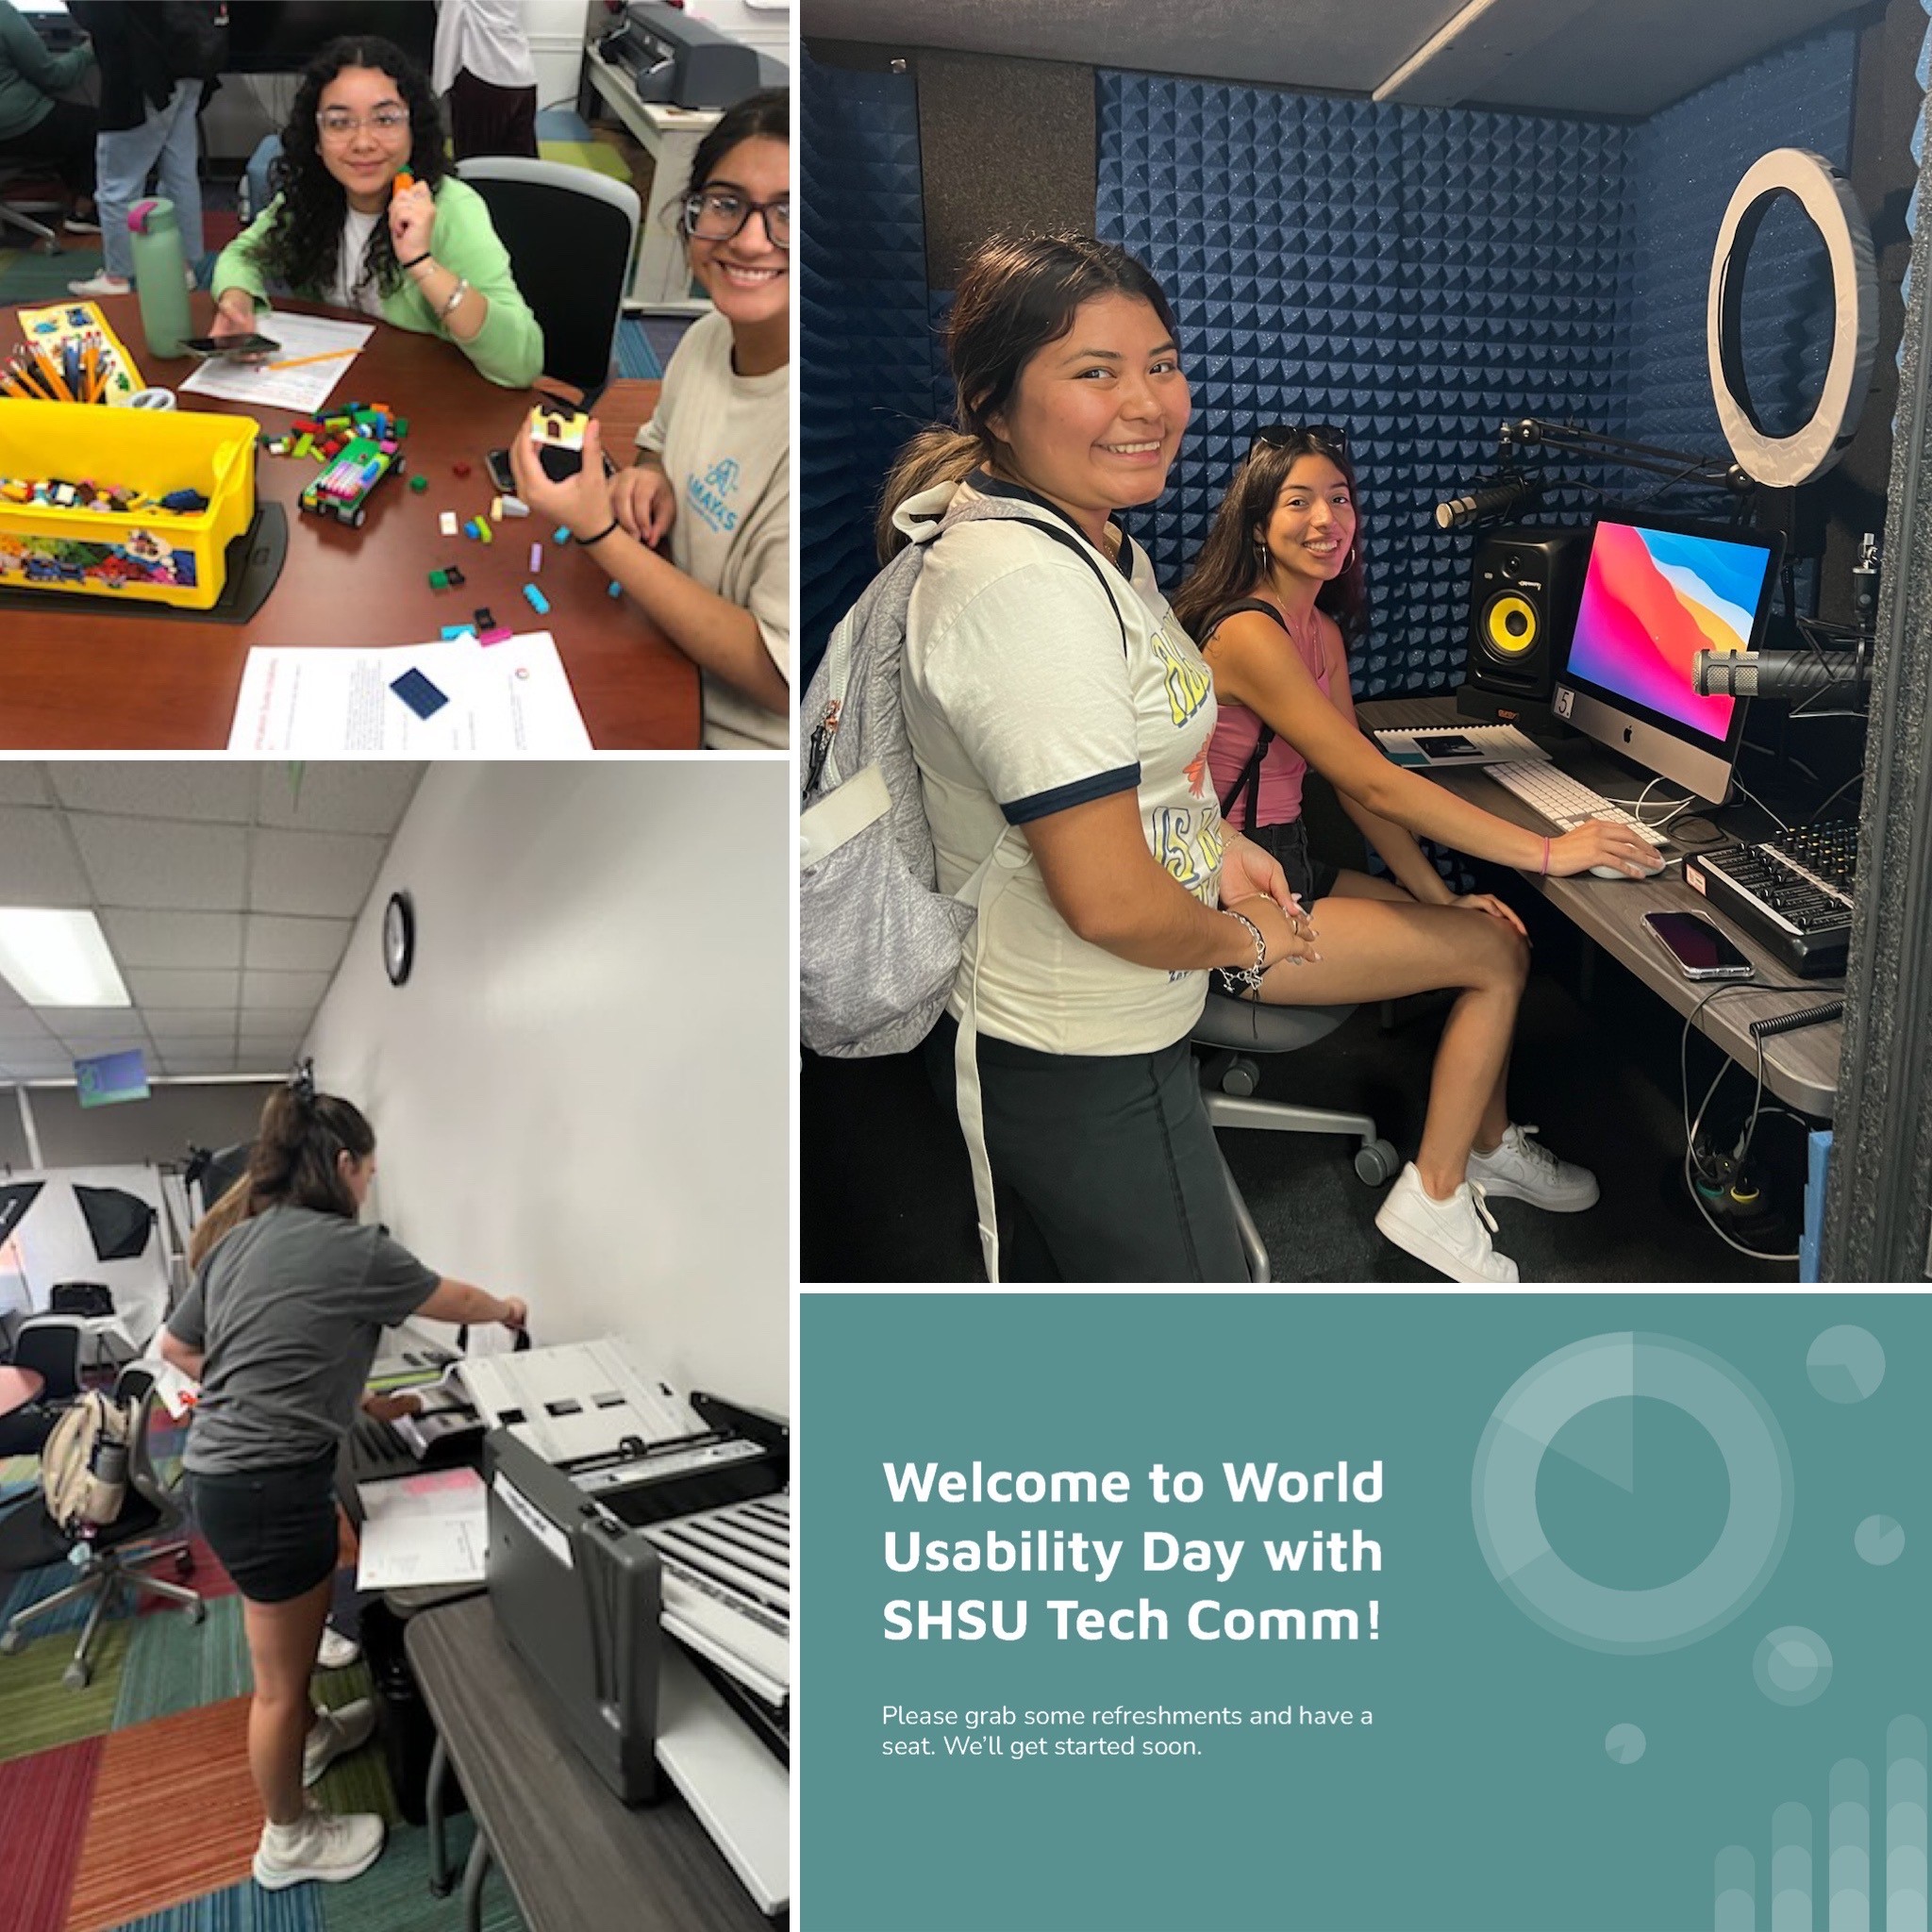 Two students smiling and tinkering with legos; Two students smiling and using IRIS computer lab; Student in IRIS lab working with printer; Welcome to World Usability Day with SHSU Tech Comm poster